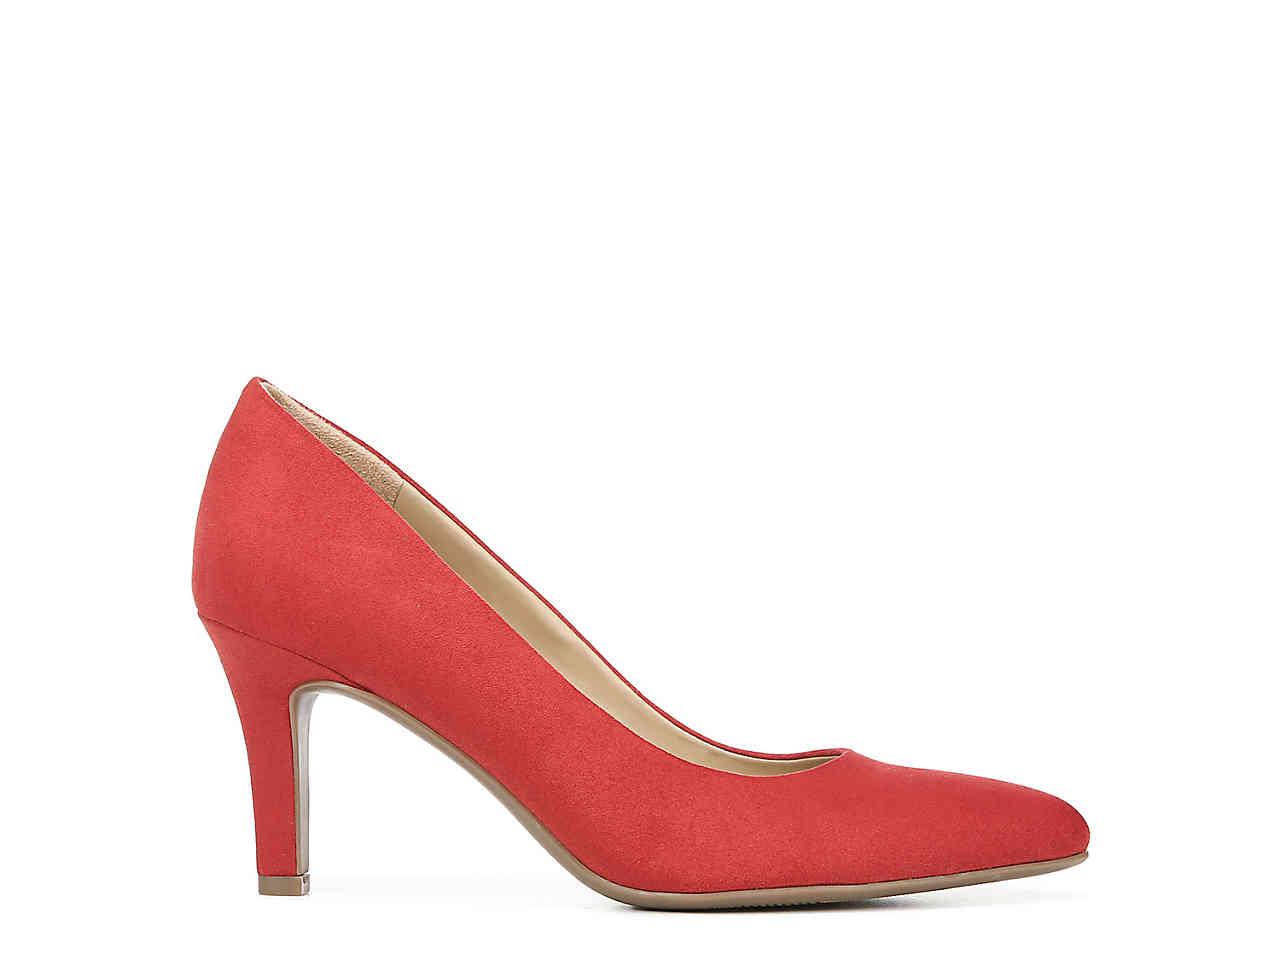 Naturalizer Leather Evie Pump in Red 